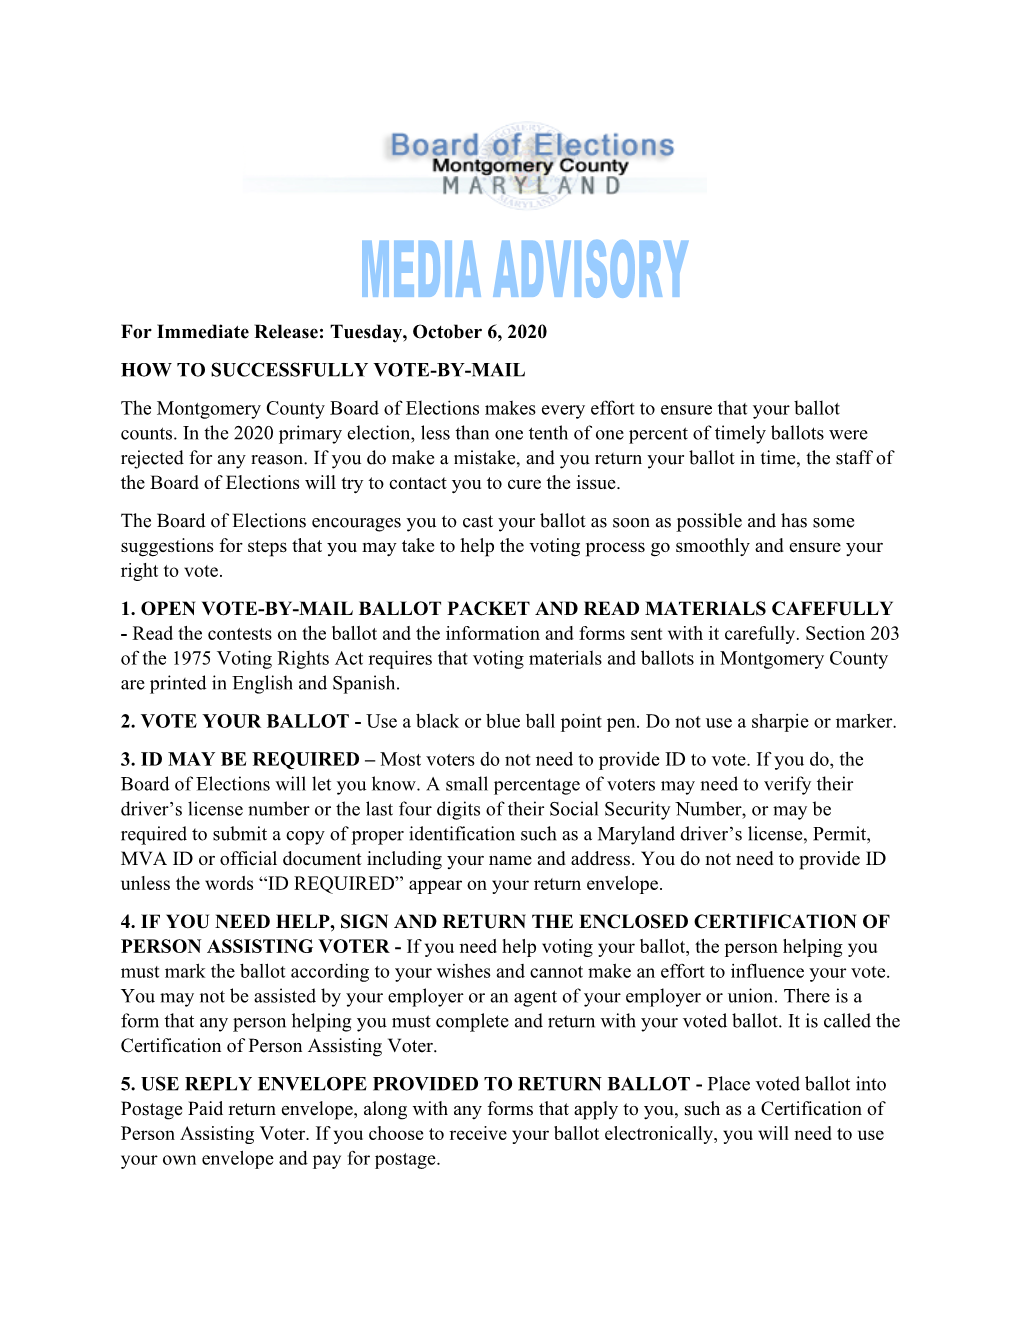 For Immediate Release: Tuesday, October 6, 2020 HOW TO